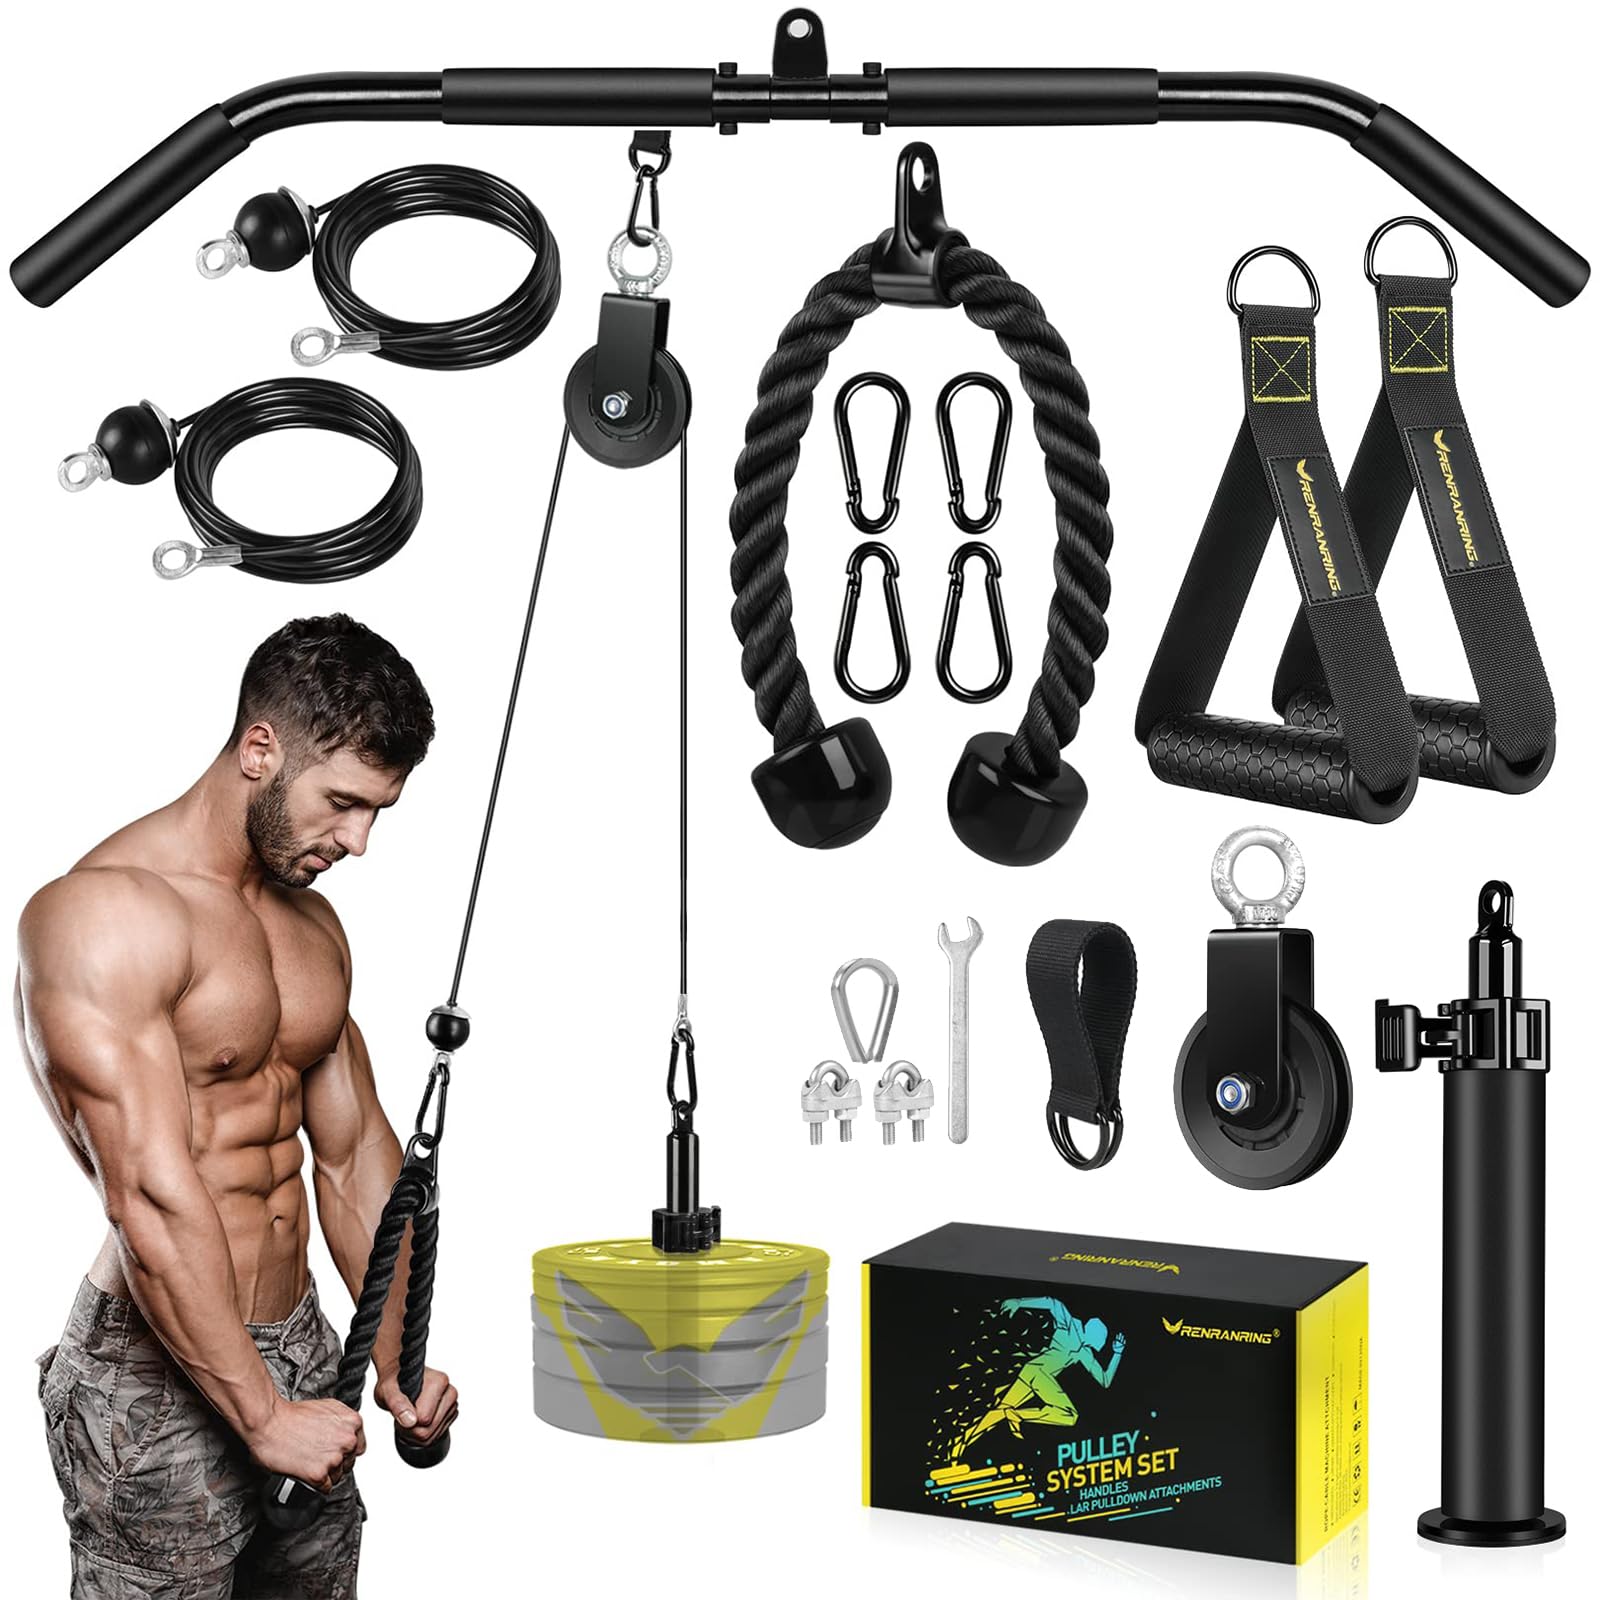 VAVOSPORT Fitness LAT and Lift Pulley System Gym - Upgraded LAT Pull Down Cable Machine Attachments, Loading Pin, Handle and Tricep Rope, for Biceps Curl, Forearm, Triceps Exercise Gym Equipment